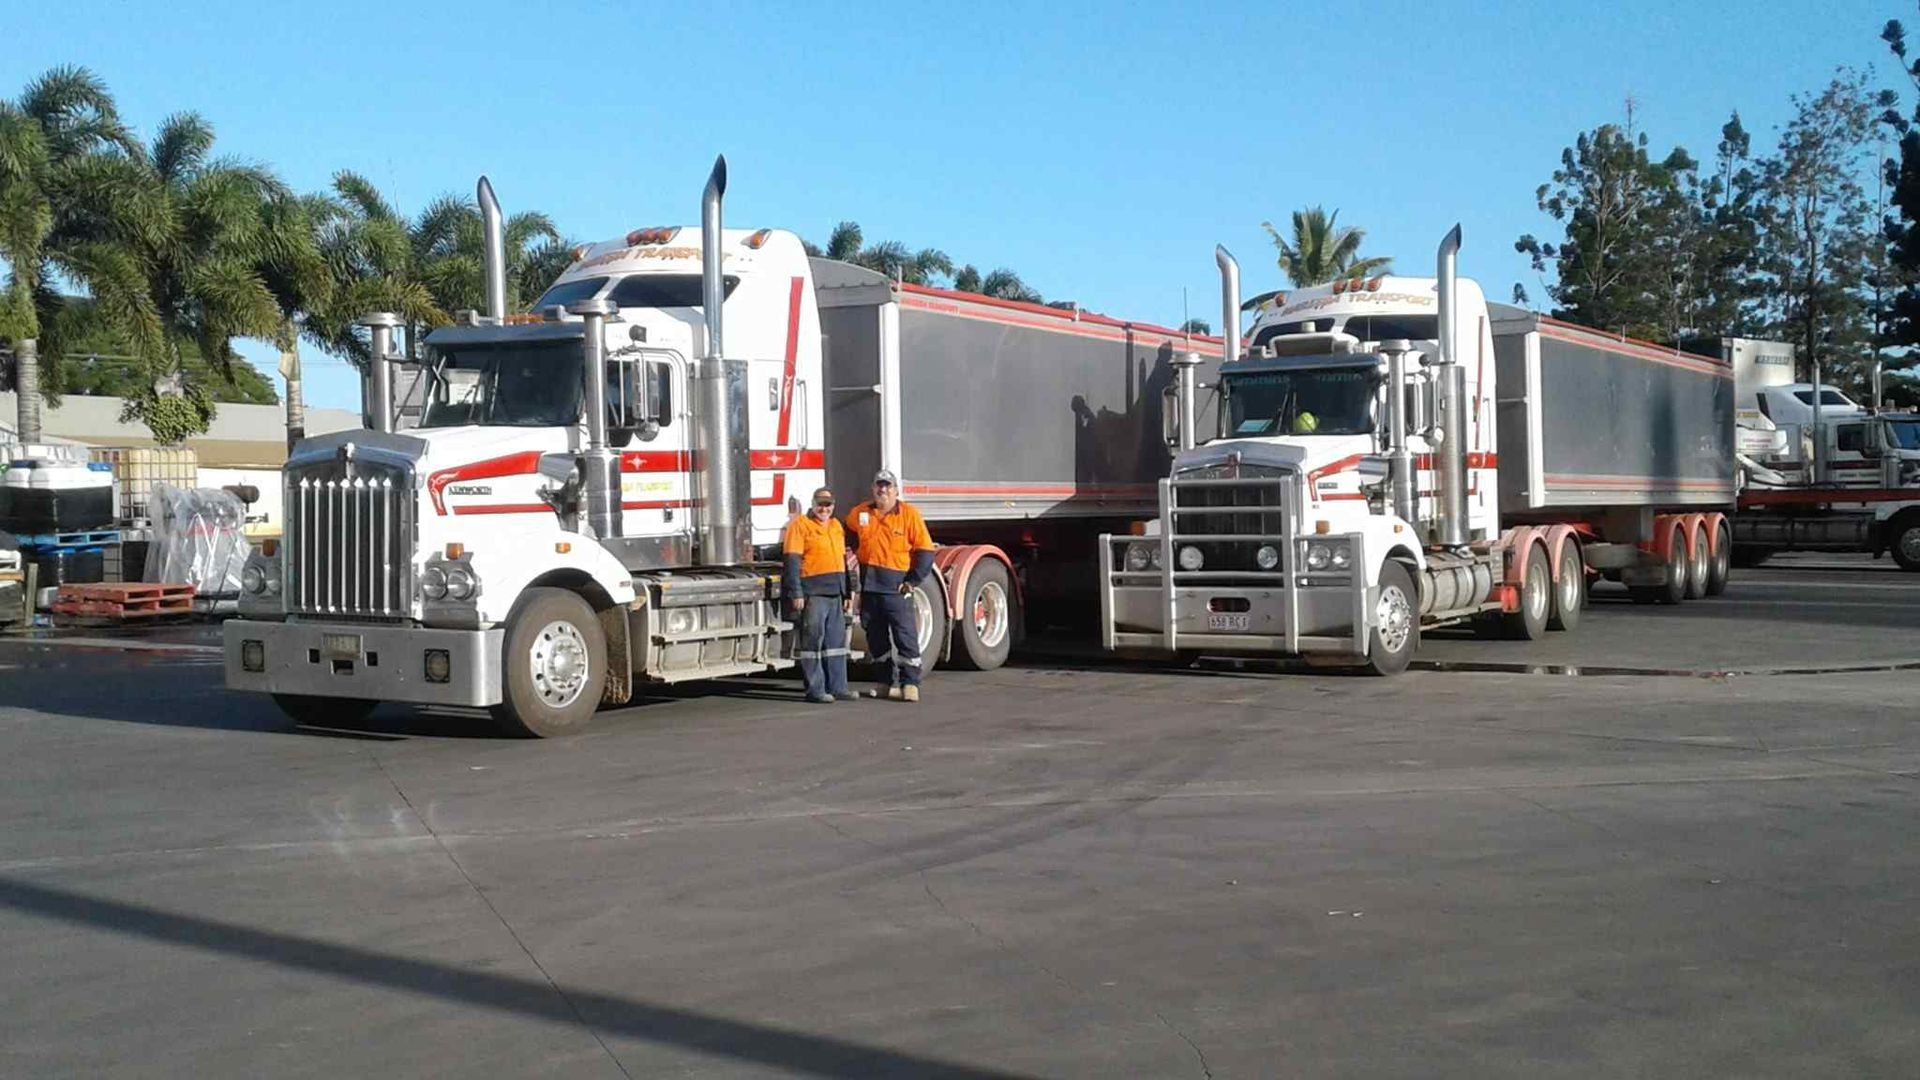 A Group of Men Standing Next to a Semi Truck — Reliable Machinery Transport in Mareeba, QLD